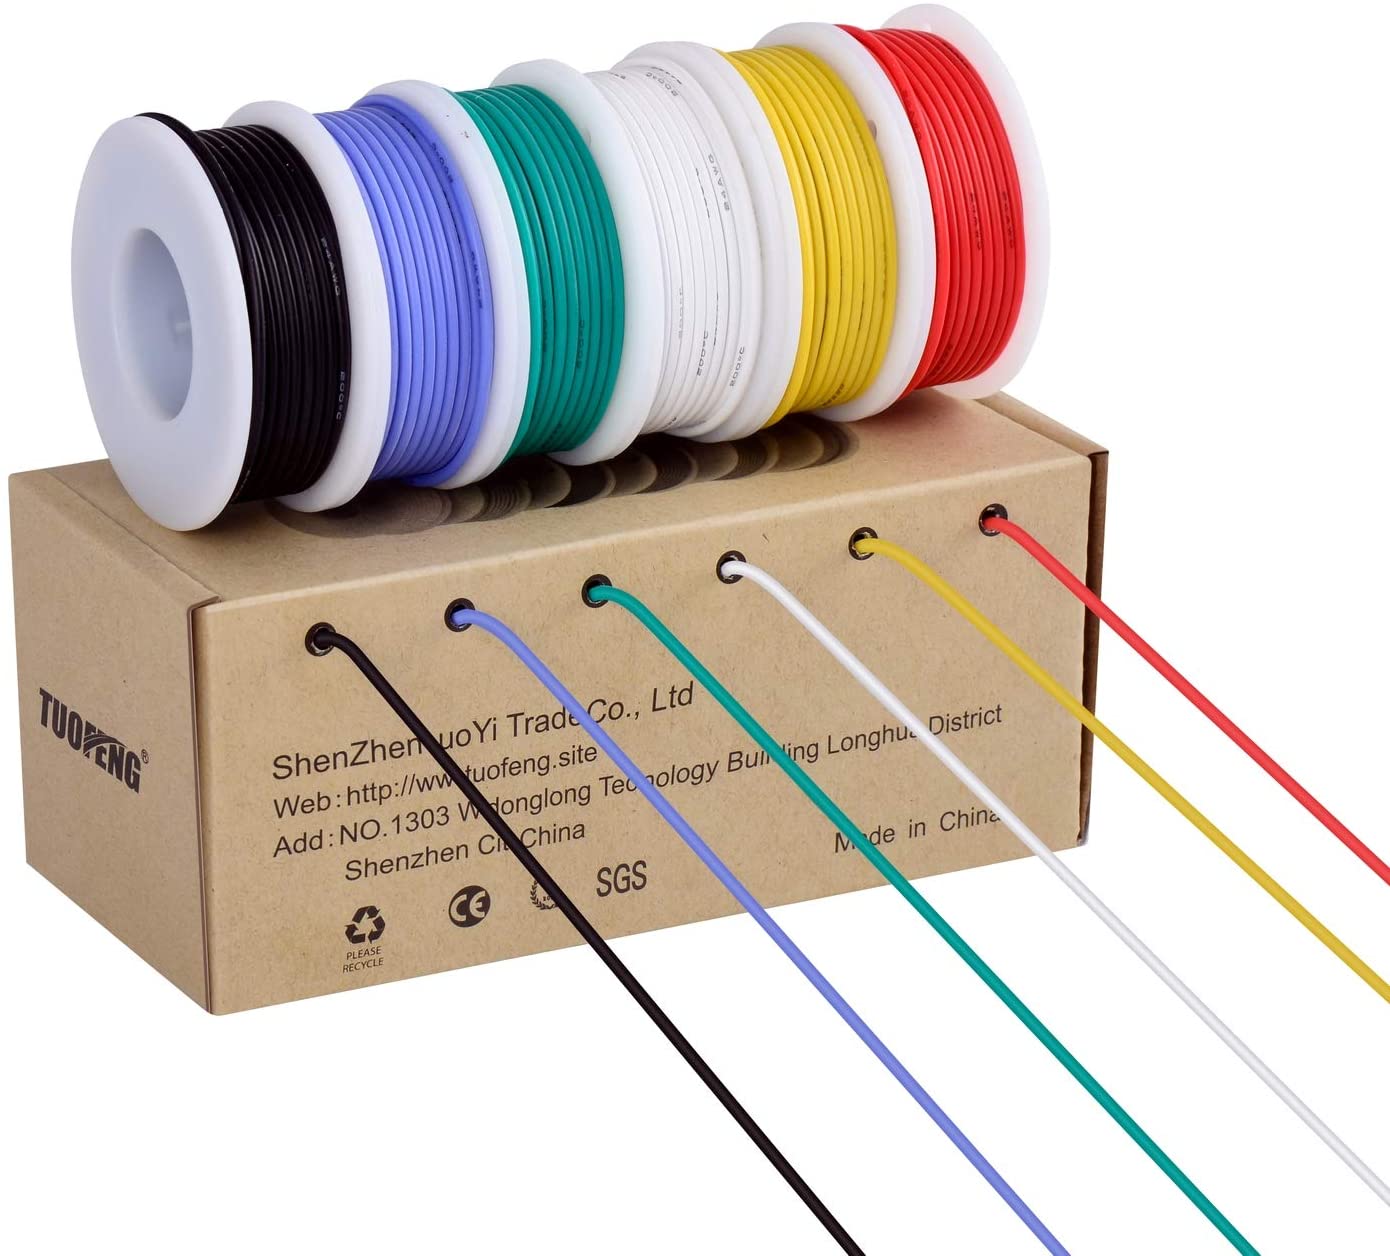 TUOFENG 20awg Electronics Wire Colored Wire Kit 20 Gauge Flexible Silicone Wire(6 Different Colored 23 Feet spools)600V Stranded Wire Hook up Wire Kit - (For 8 piece(s))